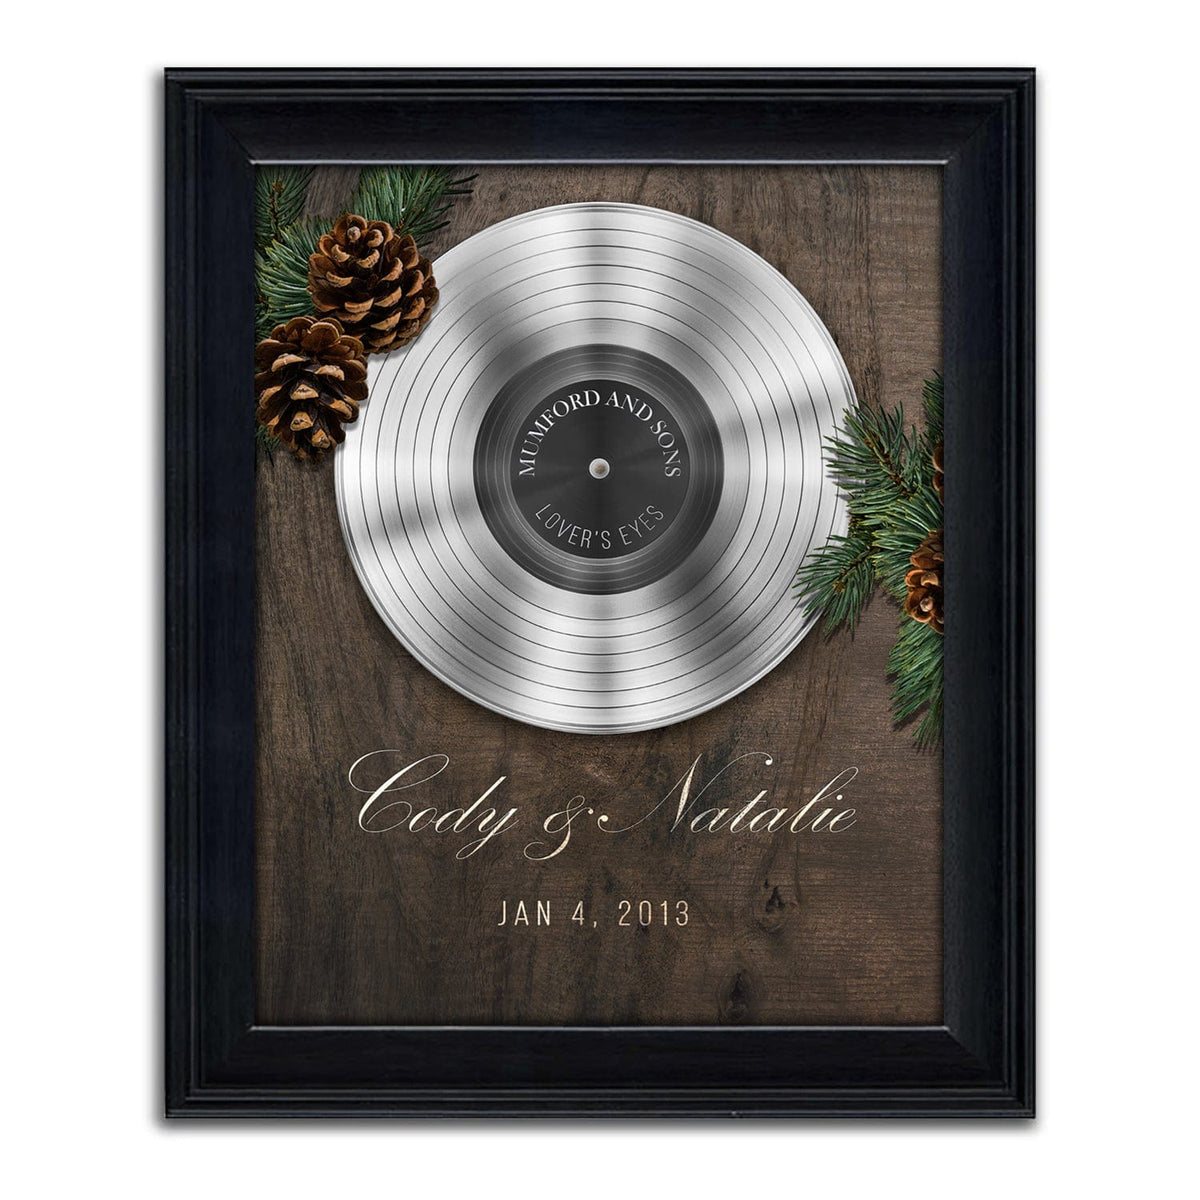 Remember your song and special day with this personalized wedding gift